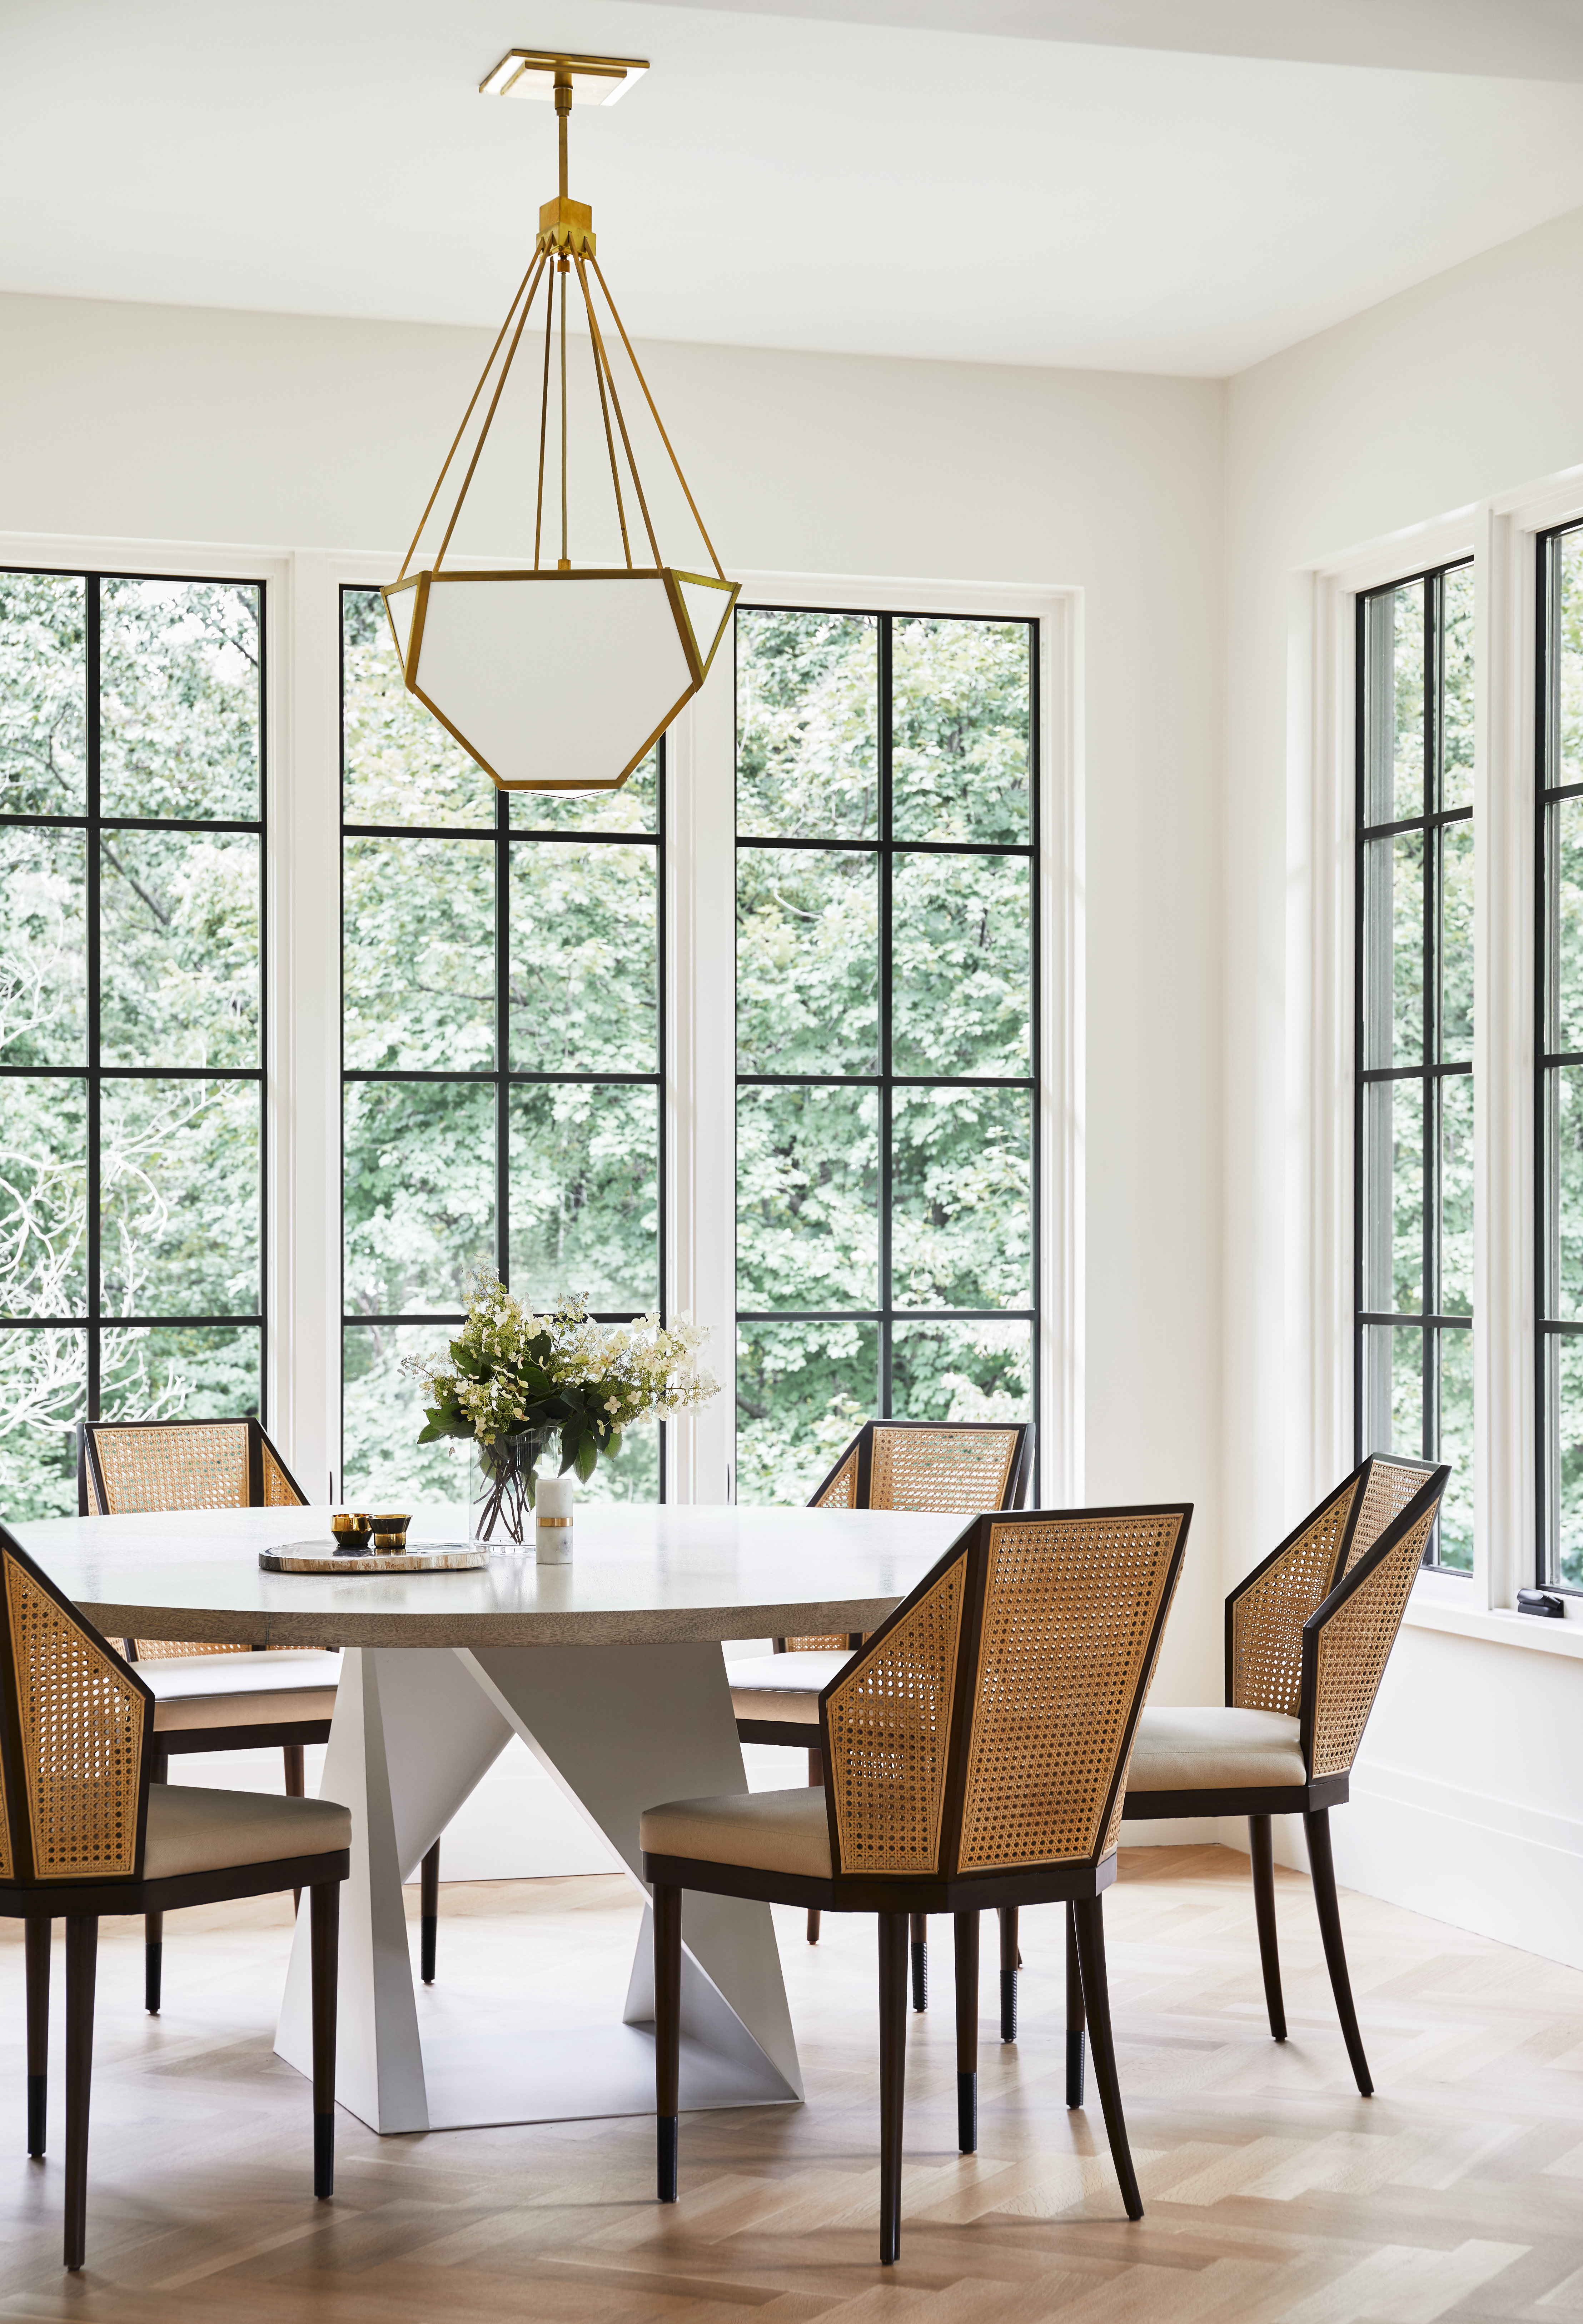 The breakfast room is one of the few spaces where angles rather than curves dominate. The cane chair panels, the round tabletop, and the overall minimalism, however, maintain the home’s light, bright vibe. “We really wanted to keep it clean and simple and allow for the natural beauty outside to peek in,” Jenny says.

 

